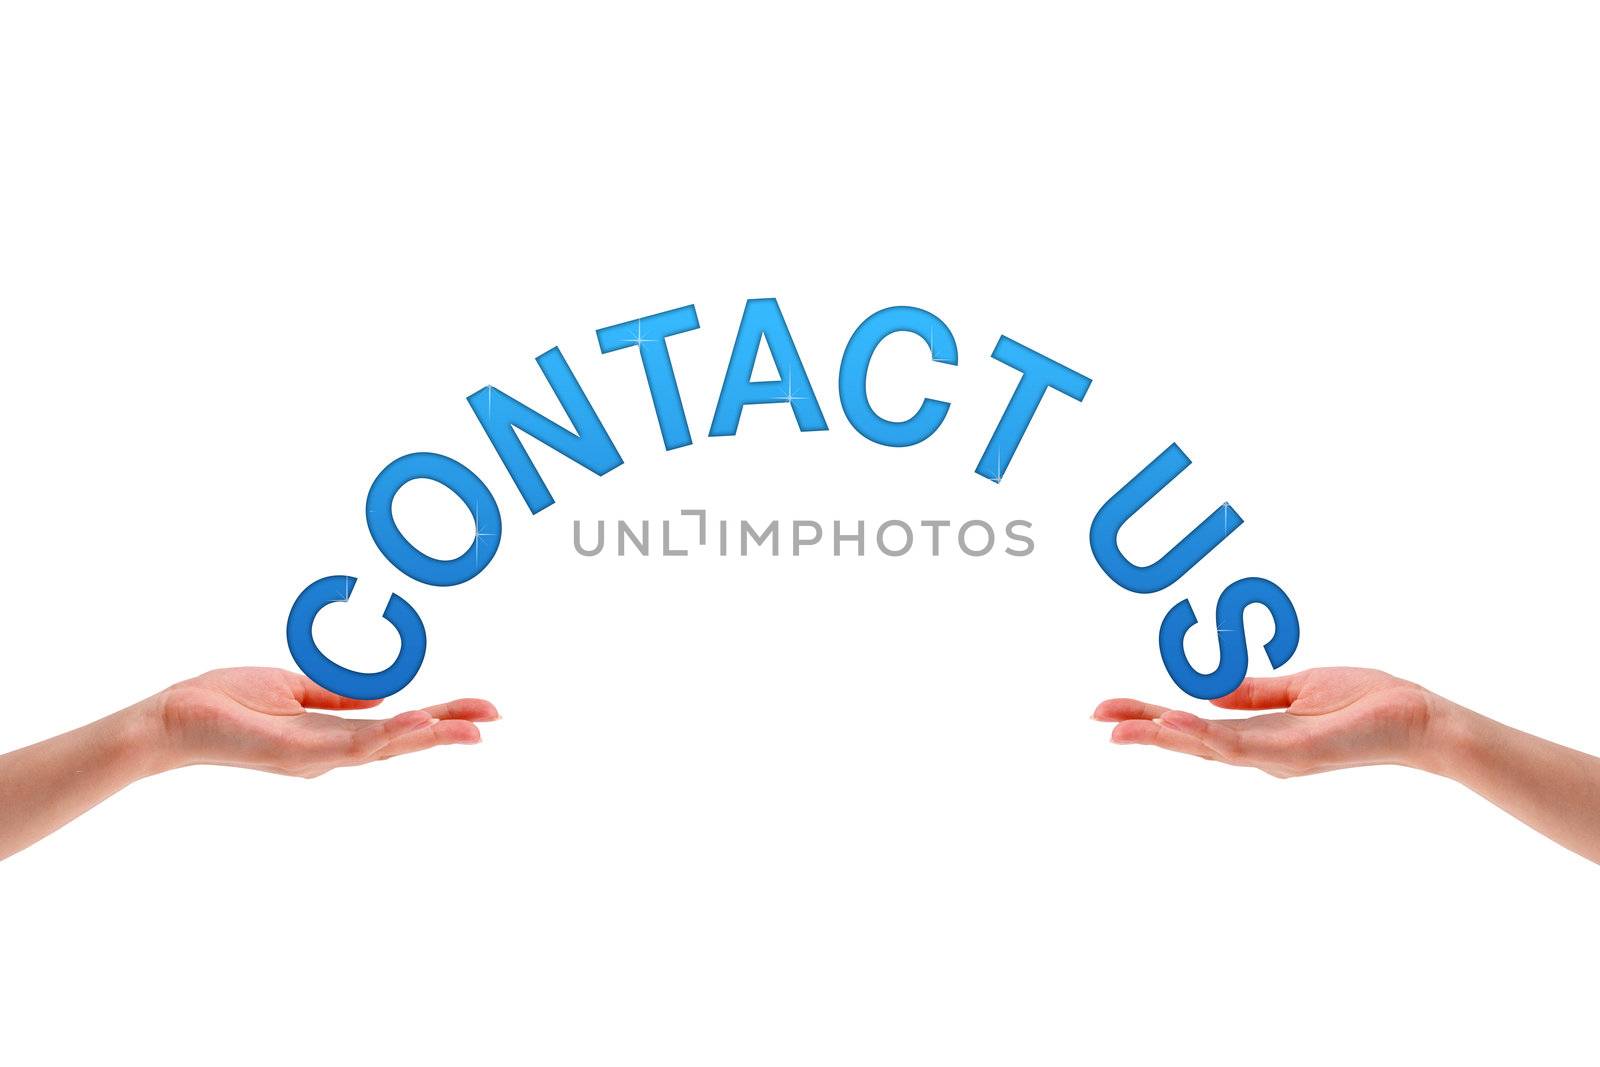 Hands holding the word contact us by kbuntu